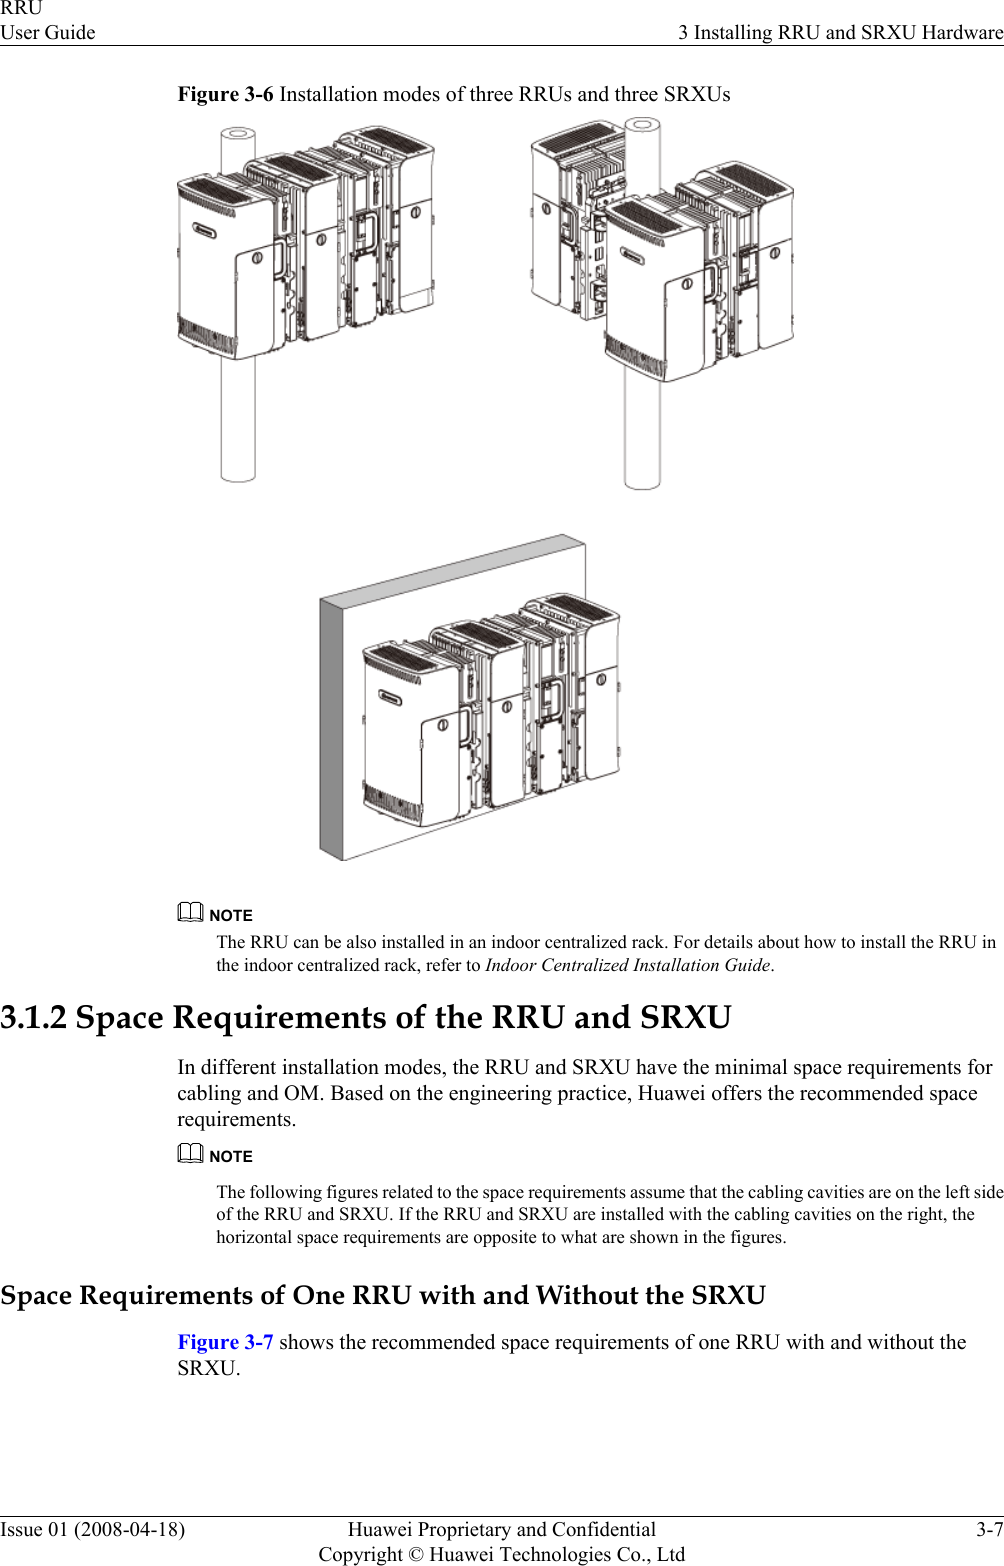 Figure 3-6 Installation modes of three RRUs and three SRXUsNOTEThe RRU can be also installed in an indoor centralized rack. For details about how to install the RRU inthe indoor centralized rack, refer to Indoor Centralized Installation Guide.3.1.2 Space Requirements of the RRU and SRXUIn different installation modes, the RRU and SRXU have the minimal space requirements forcabling and OM. Based on the engineering practice, Huawei offers the recommended spacerequirements.NOTEThe following figures related to the space requirements assume that the cabling cavities are on the left sideof the RRU and SRXU. If the RRU and SRXU are installed with the cabling cavities on the right, thehorizontal space requirements are opposite to what are shown in the figures.Space Requirements of One RRU with and Without the SRXUFigure 3-7 shows the recommended space requirements of one RRU with and without theSRXU.RRUUser Guide 3 Installing RRU and SRXU HardwareIssue 01 (2008-04-18) Huawei Proprietary and ConfidentialCopyright © Huawei Technologies Co., Ltd3-7